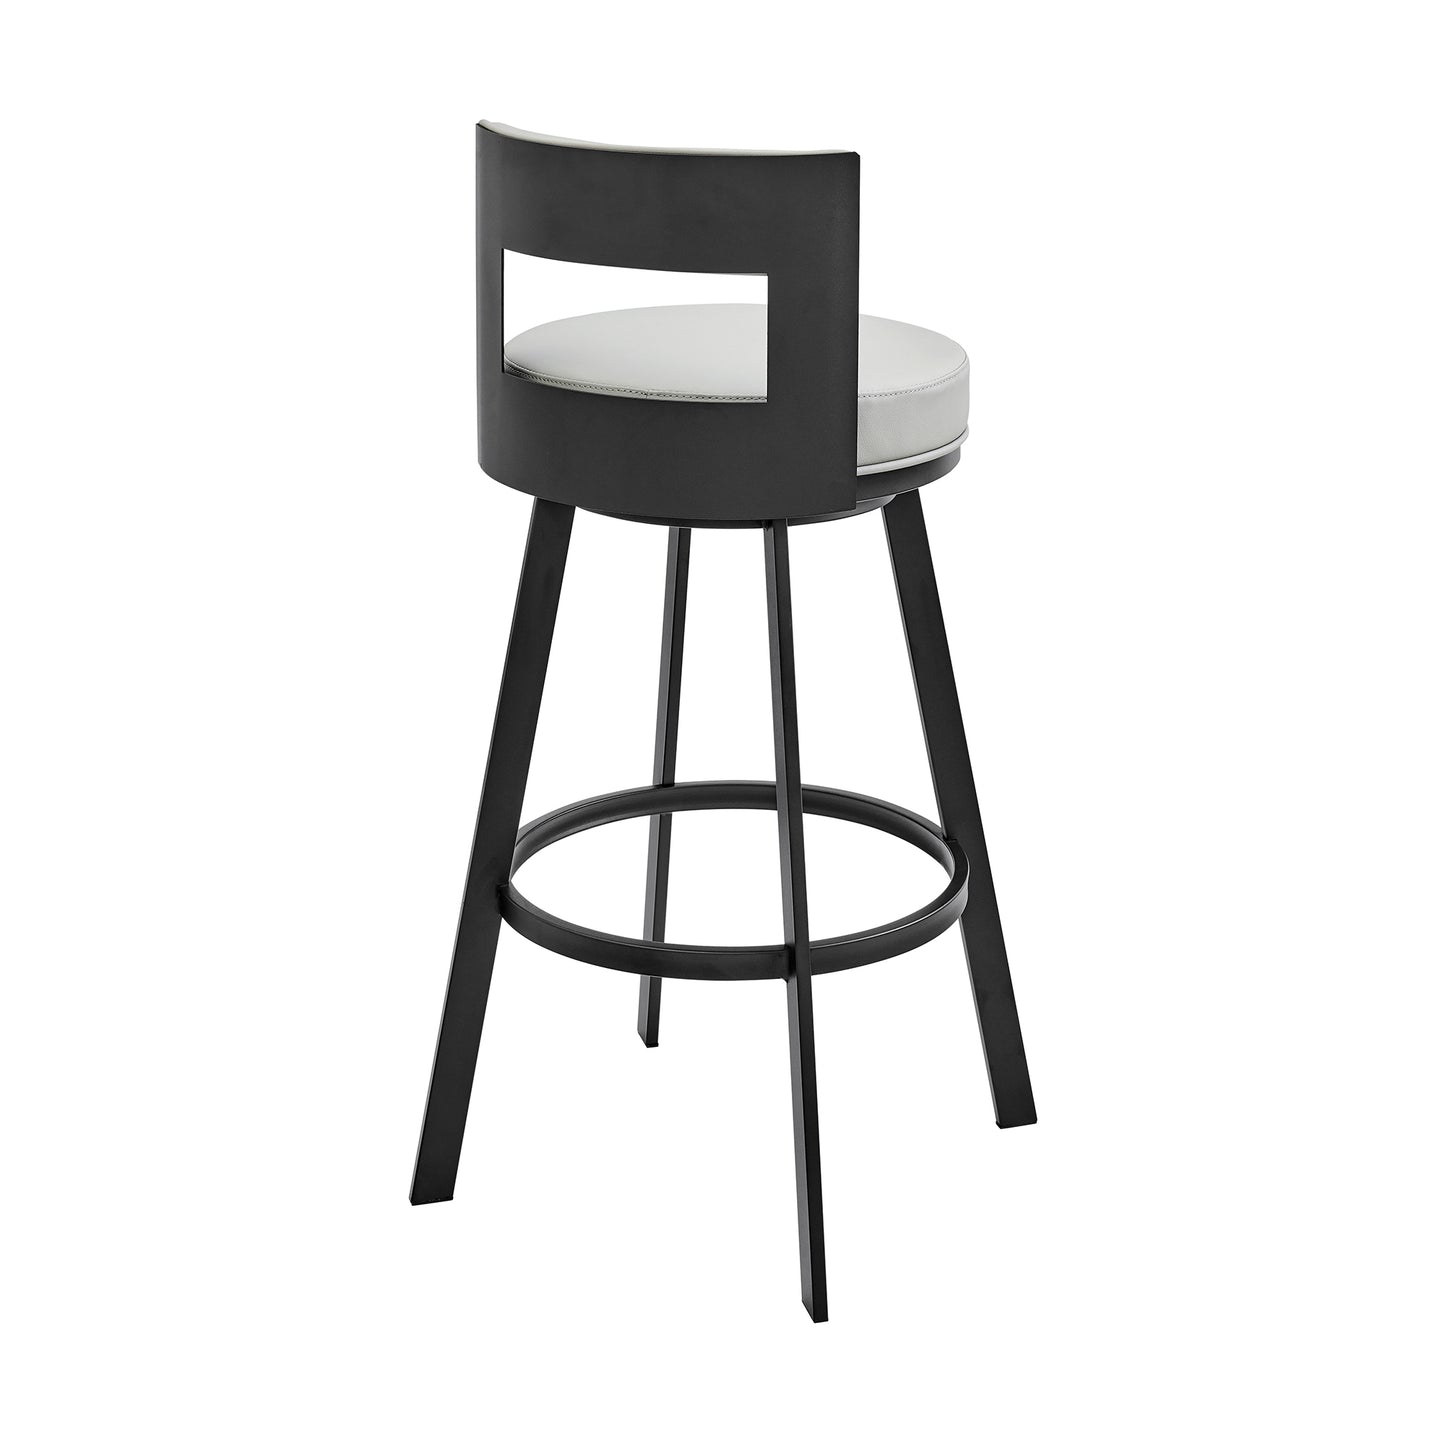 Flynn 26" Swivel Counter Stool in Black Metal with Light Gray Faux Leather